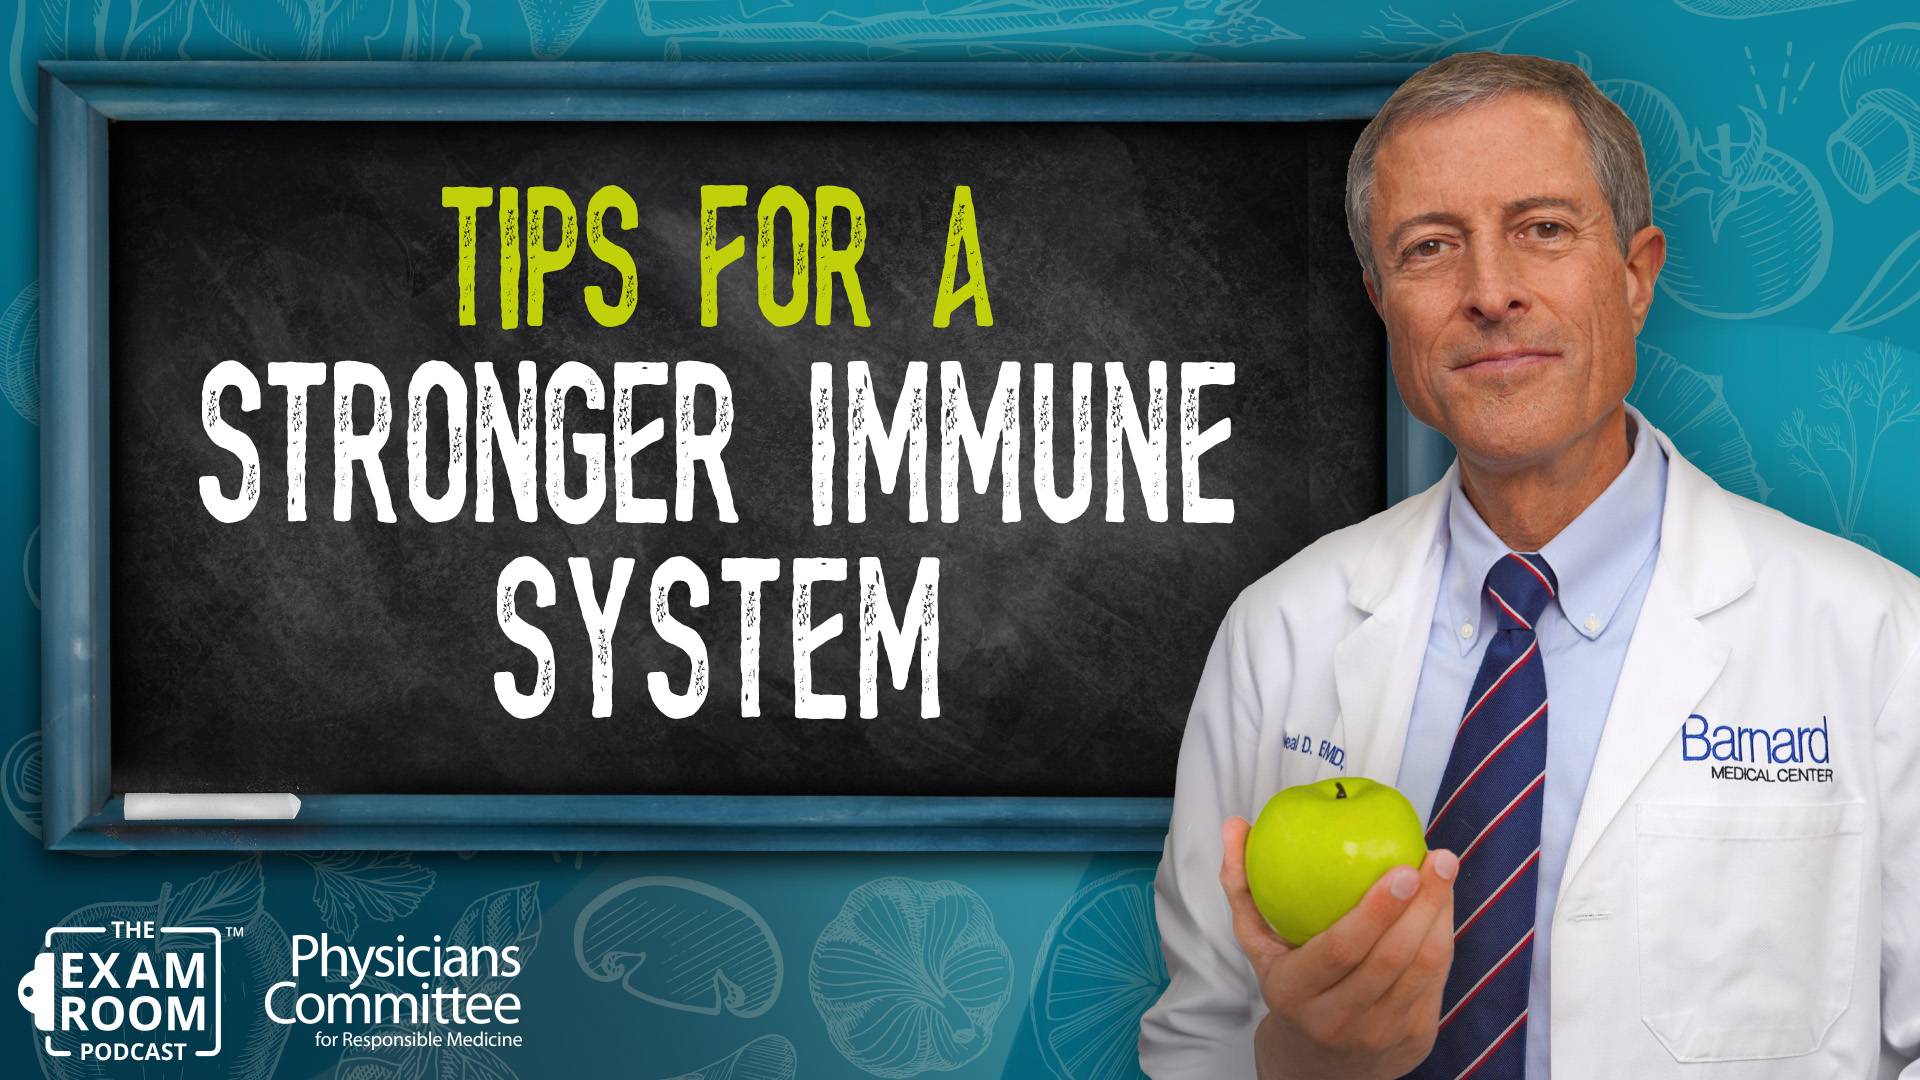 5 Foods for a Naturally Strong Immune System | Dr. Neal Barnard Live Q&A